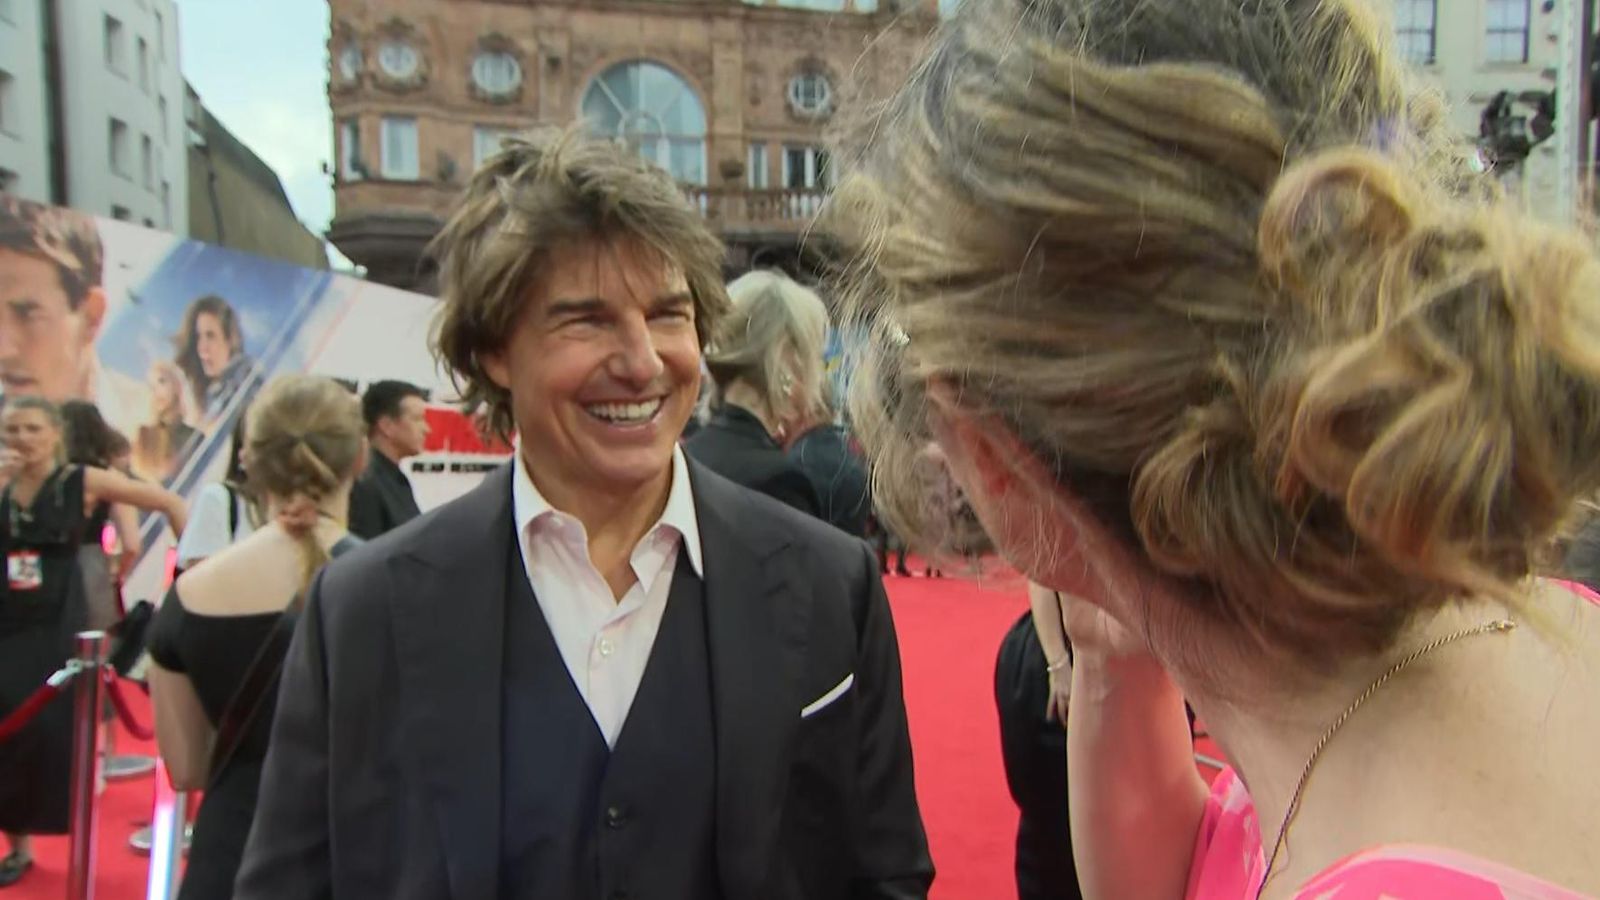 Tom Cruise says release of Mission: Impossible 7 'a beautiful moment' after COVID restrictions